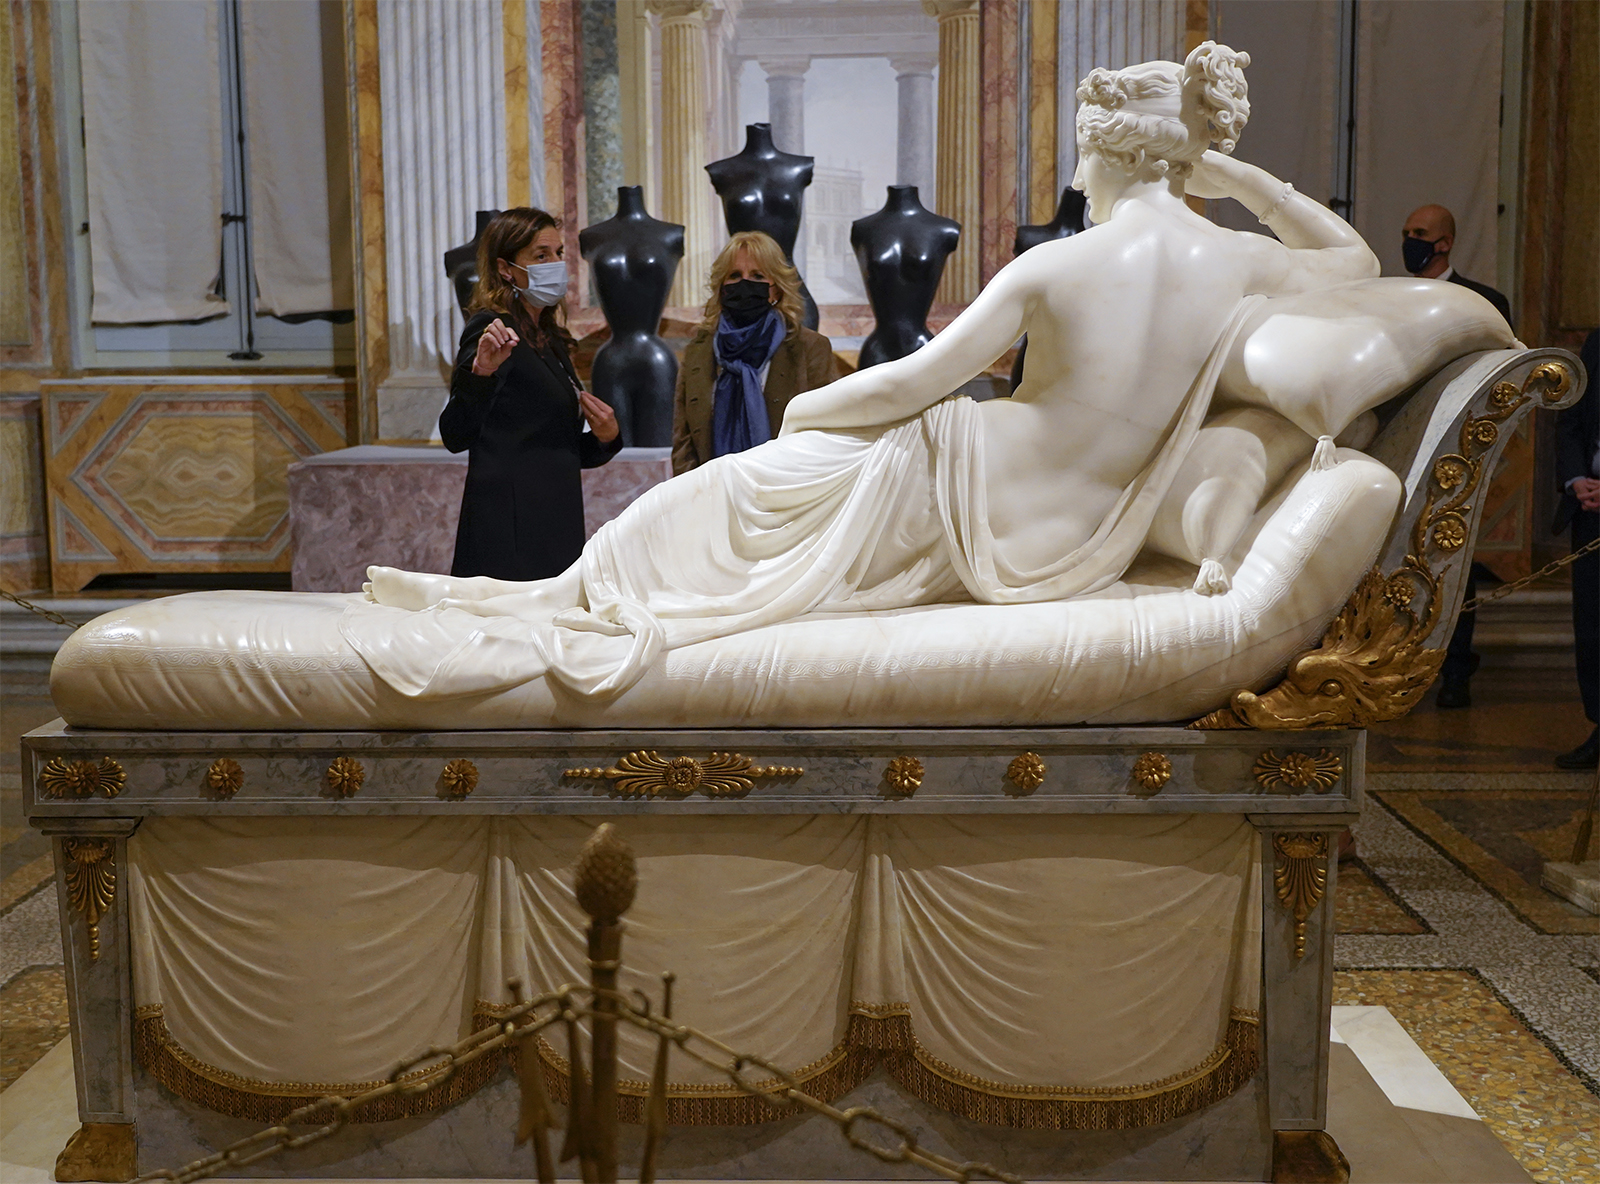 THE FIRST LADY OF THE UNITED STATES, JILL BIDEN, VISITING THE GALLERIA BORGHESE